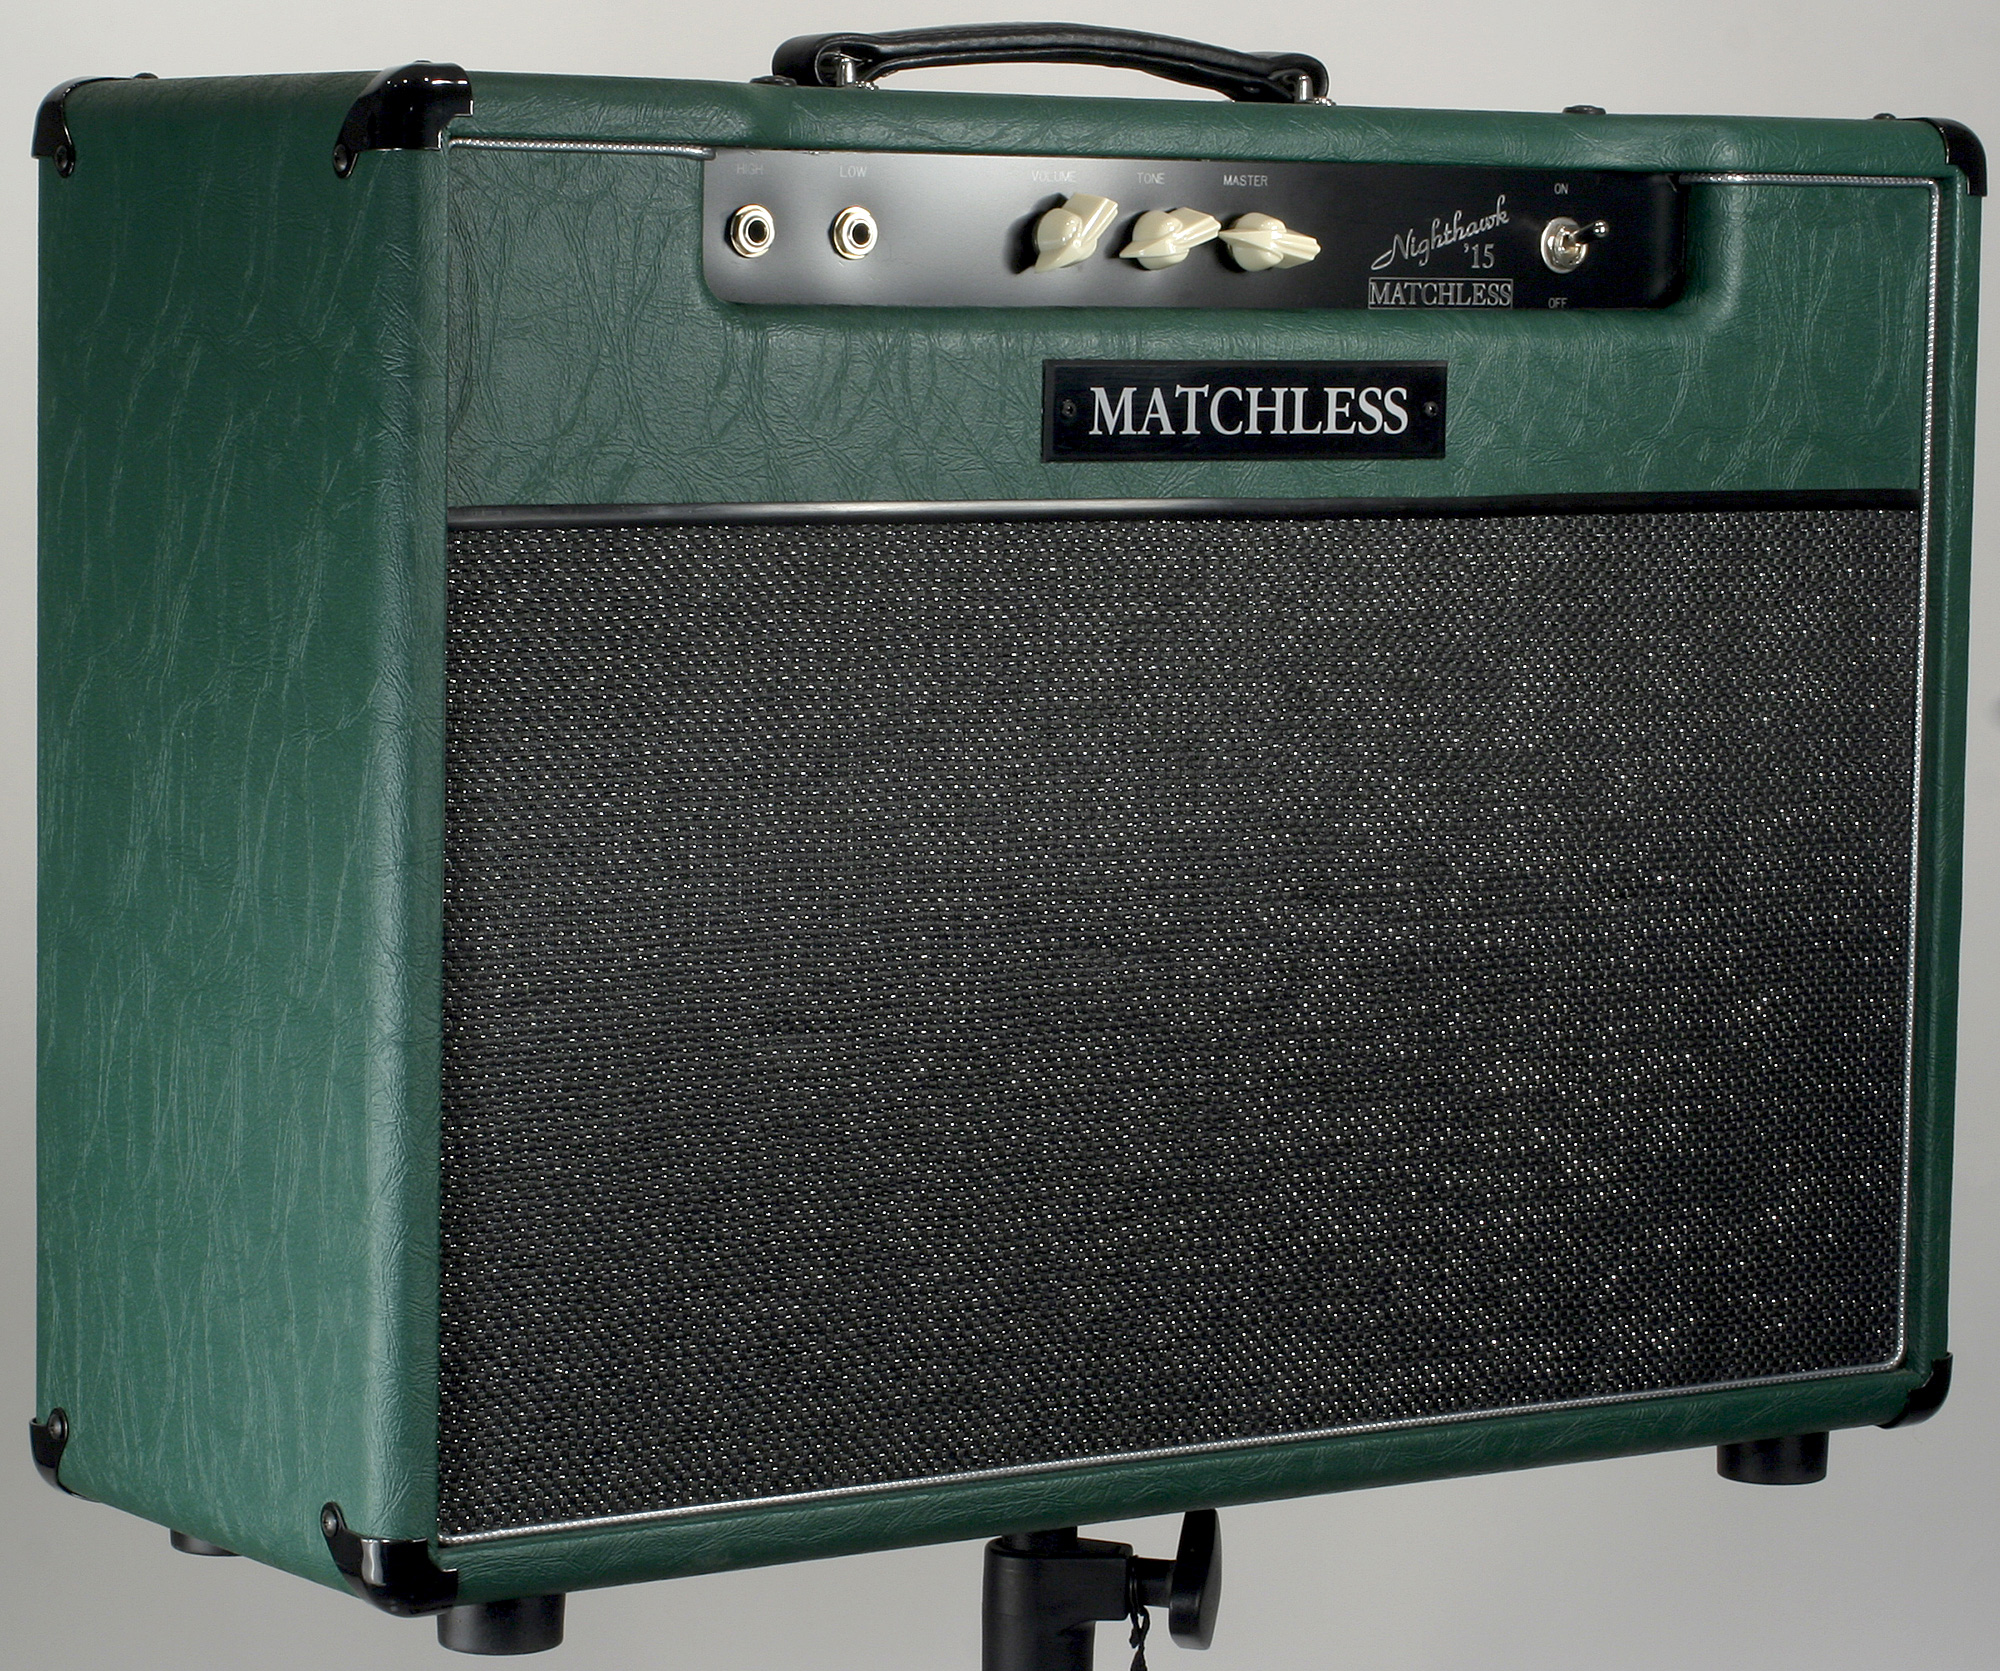 Matchless Nighthawk 112 15w 1x12 Green Silver - Electric guitar combo amp - Variation 1